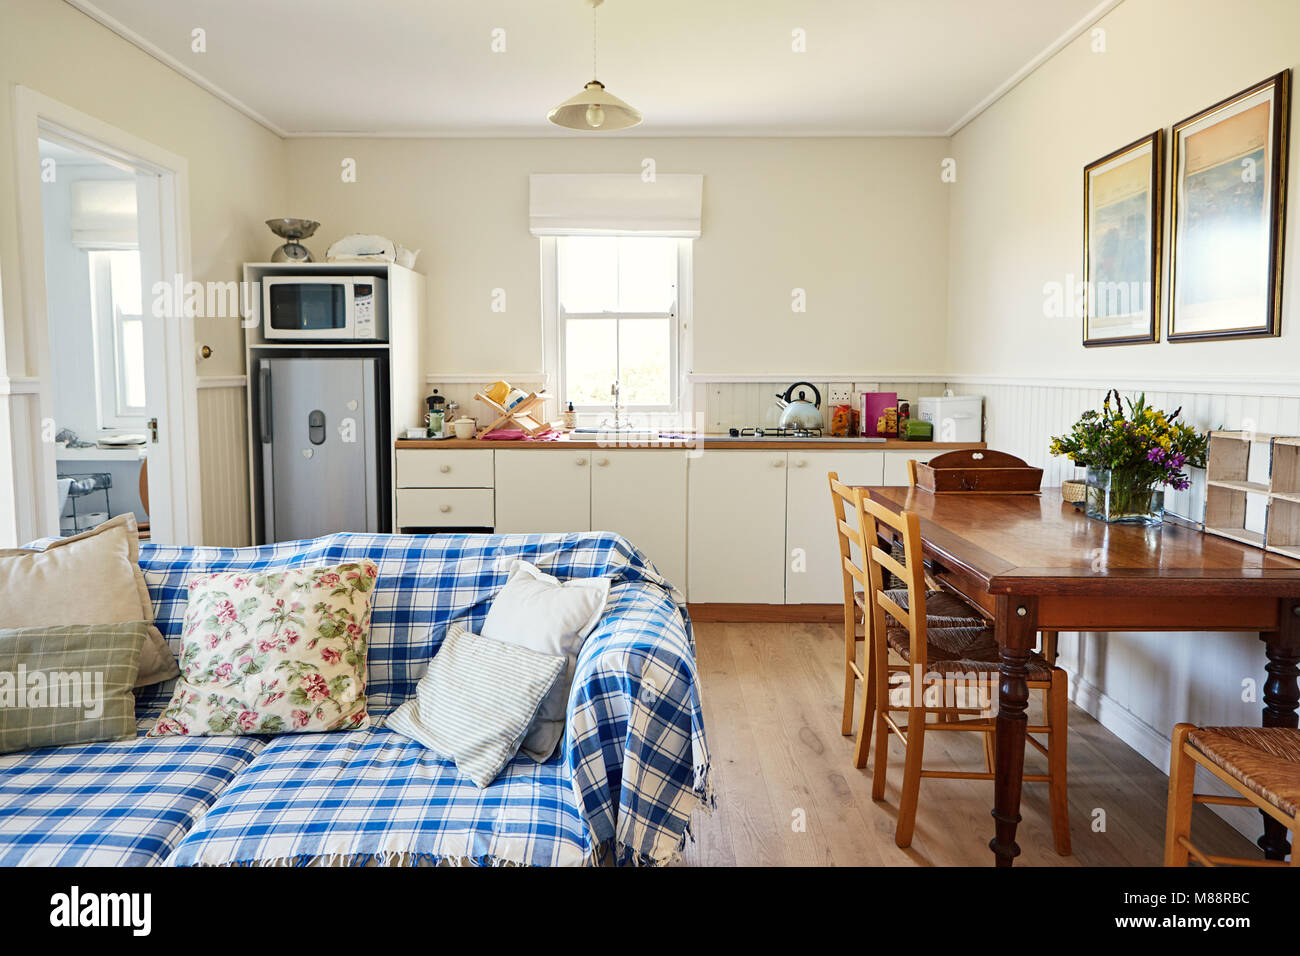 Interior of a lounge with a small kitchen in the background of a country style residential home Stock Photo